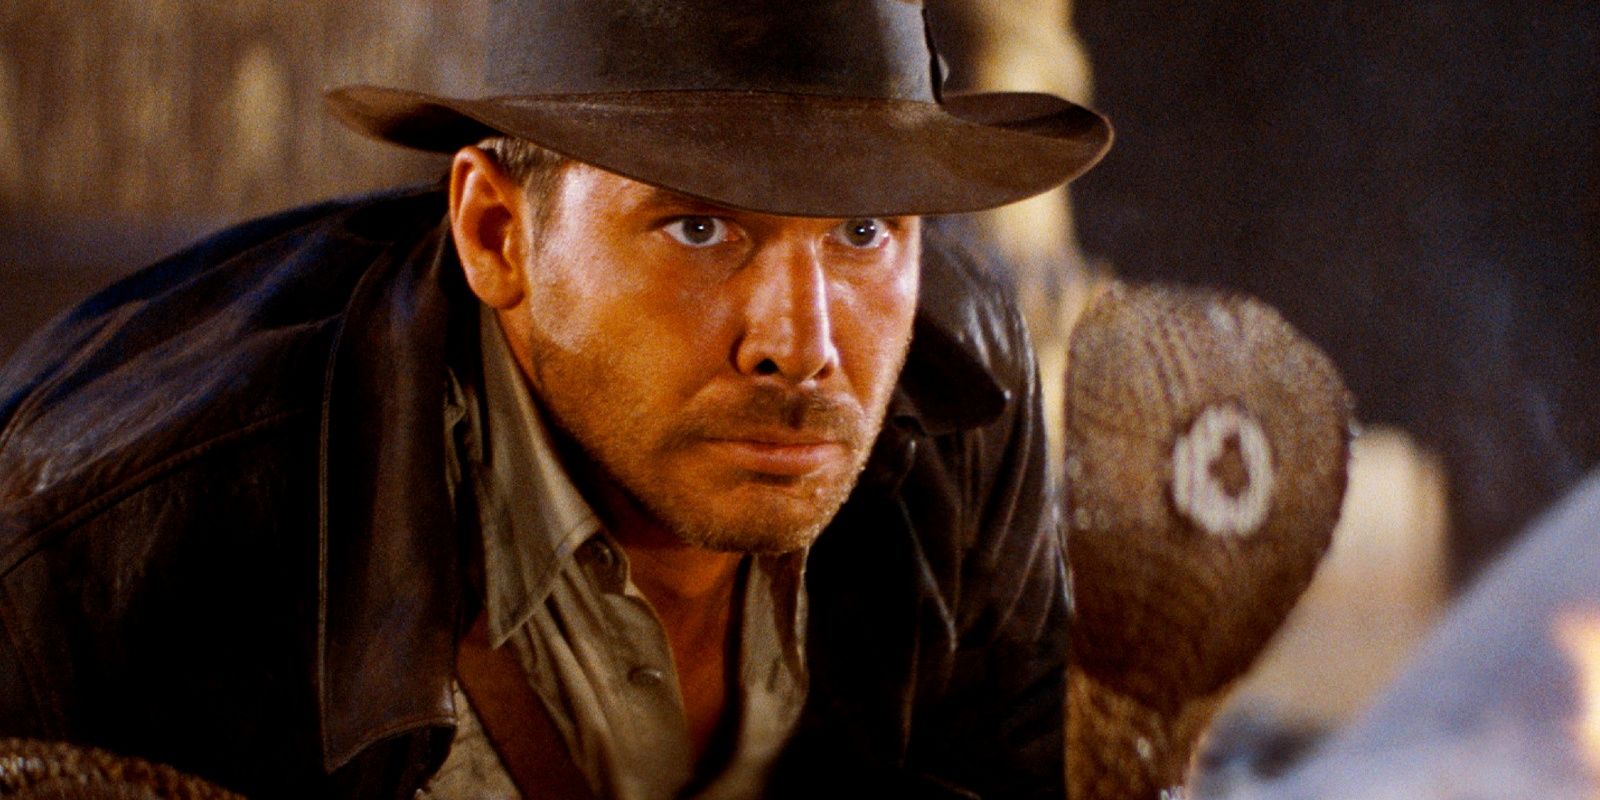 indiana-jones’-infamous-snake-scene-loses-accuracy-"points"-in-expert’s-assessment